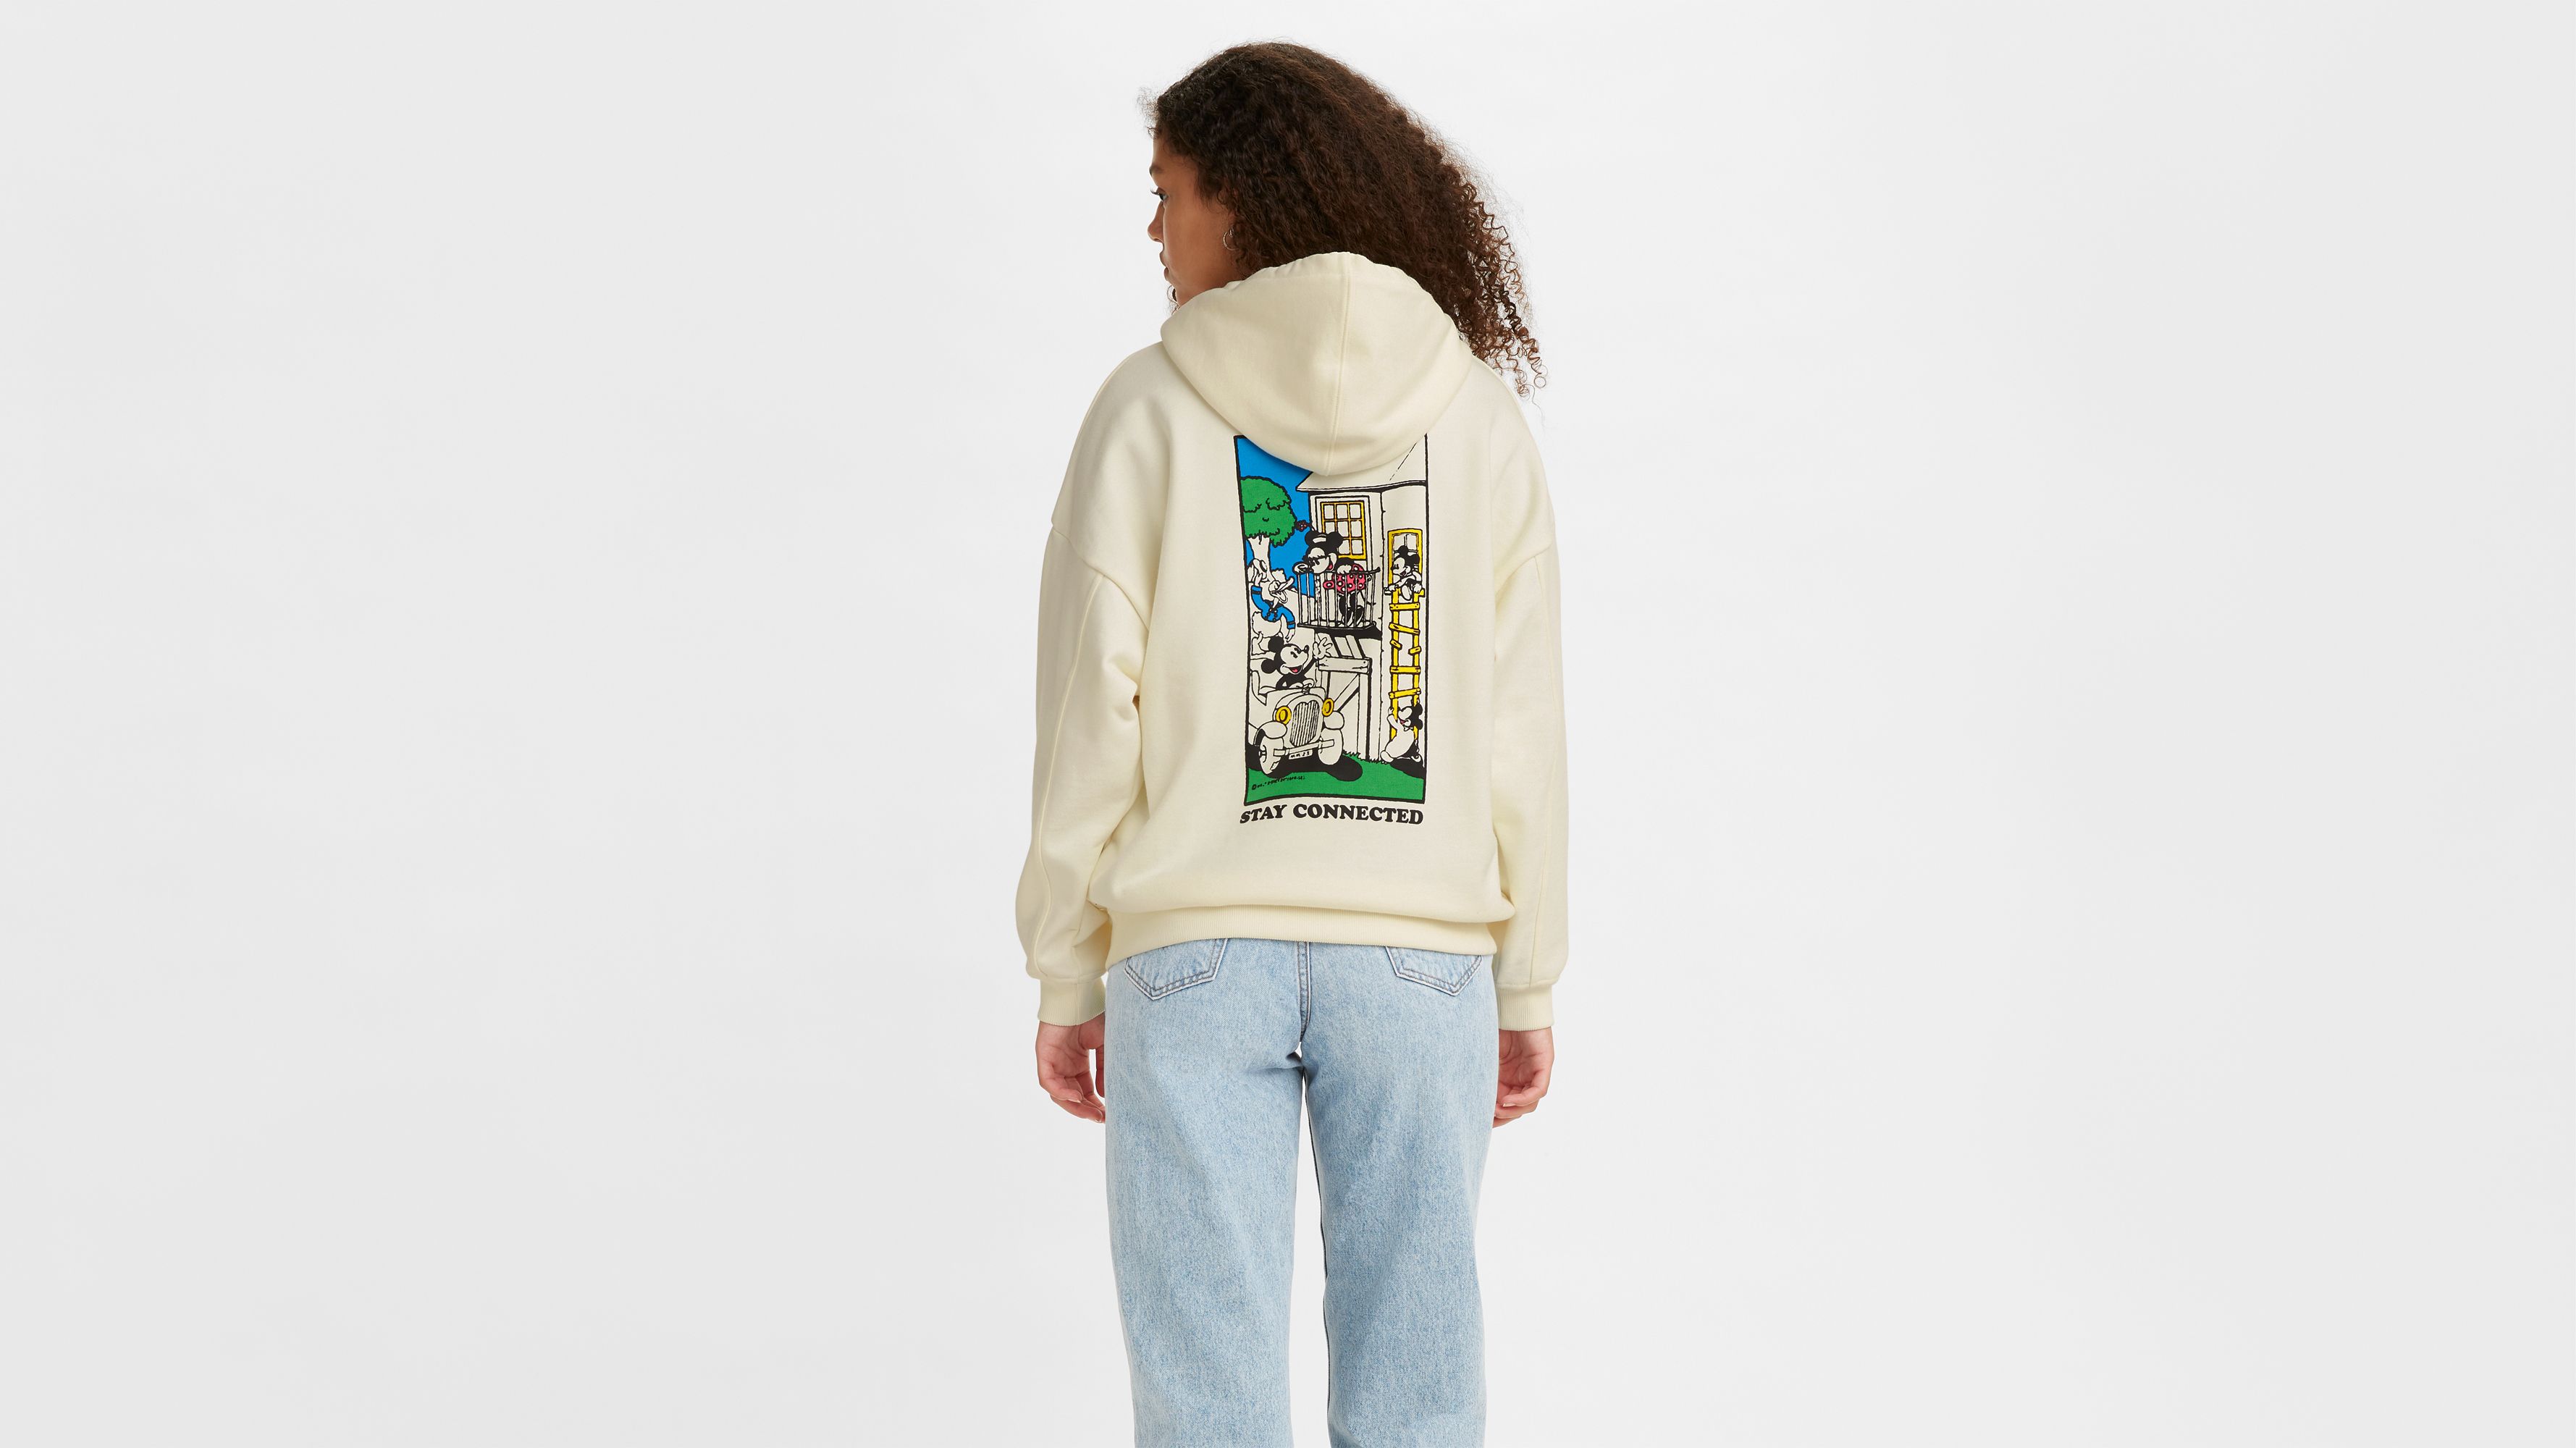 graphic hoodie levis